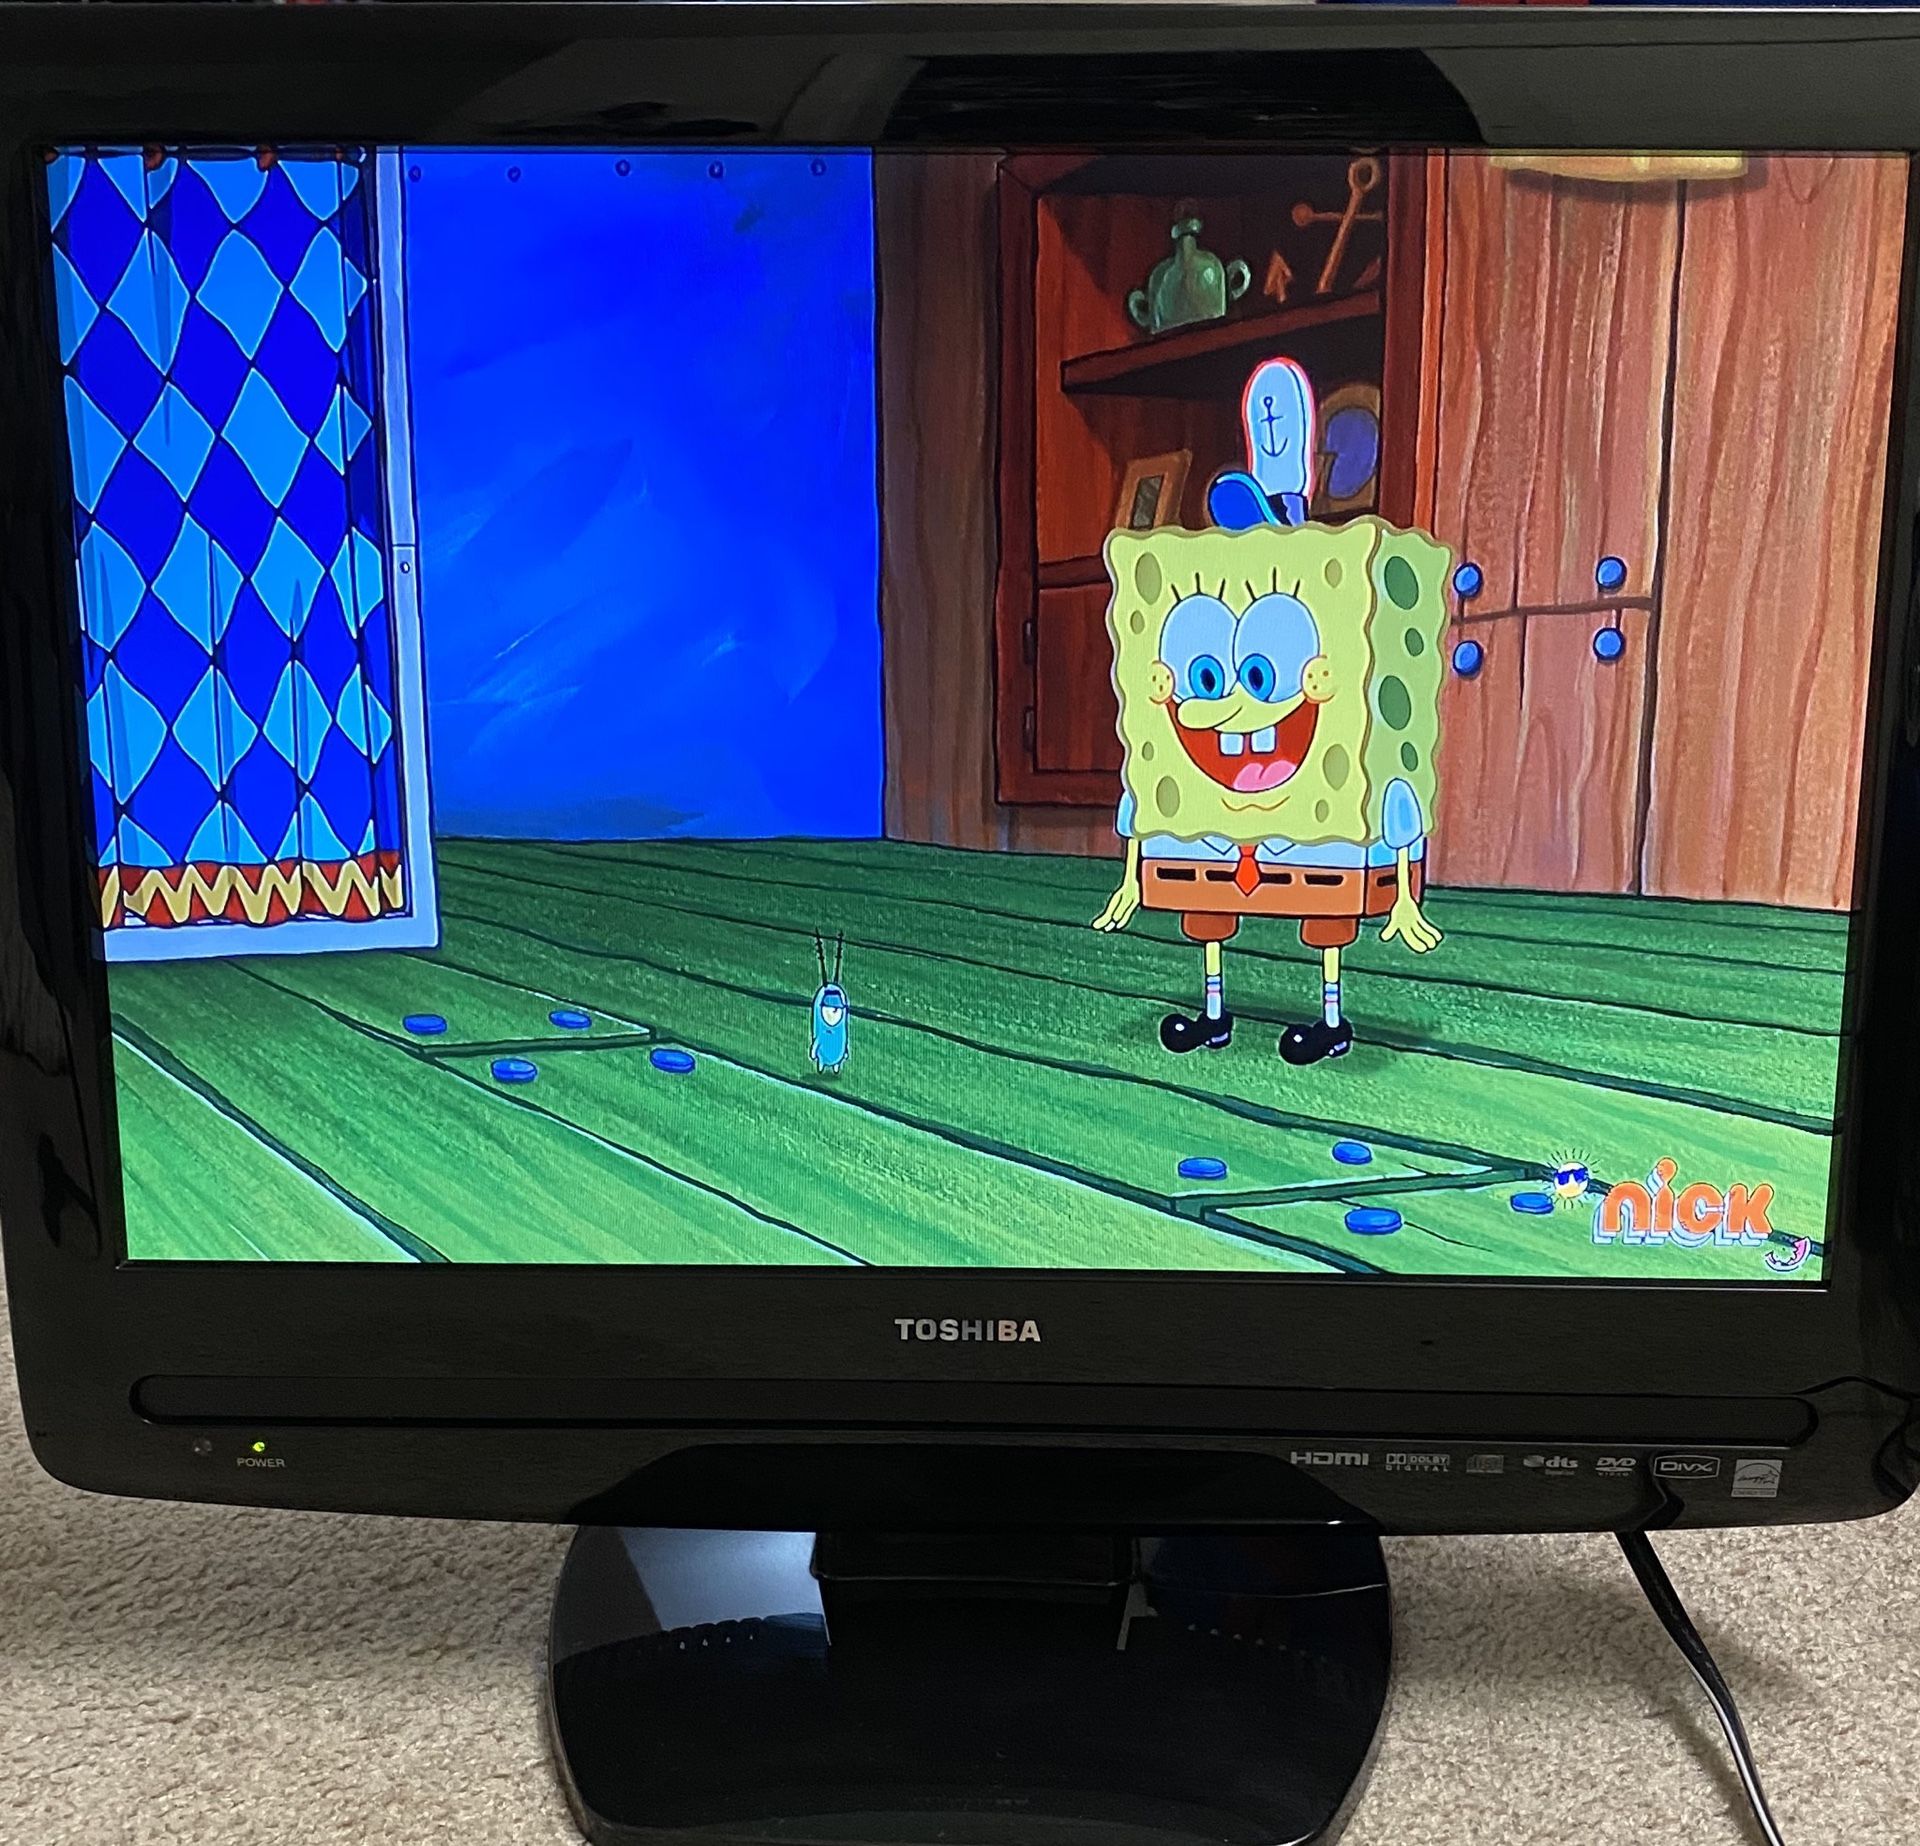 Toshiba TV 19inch build in DVD player